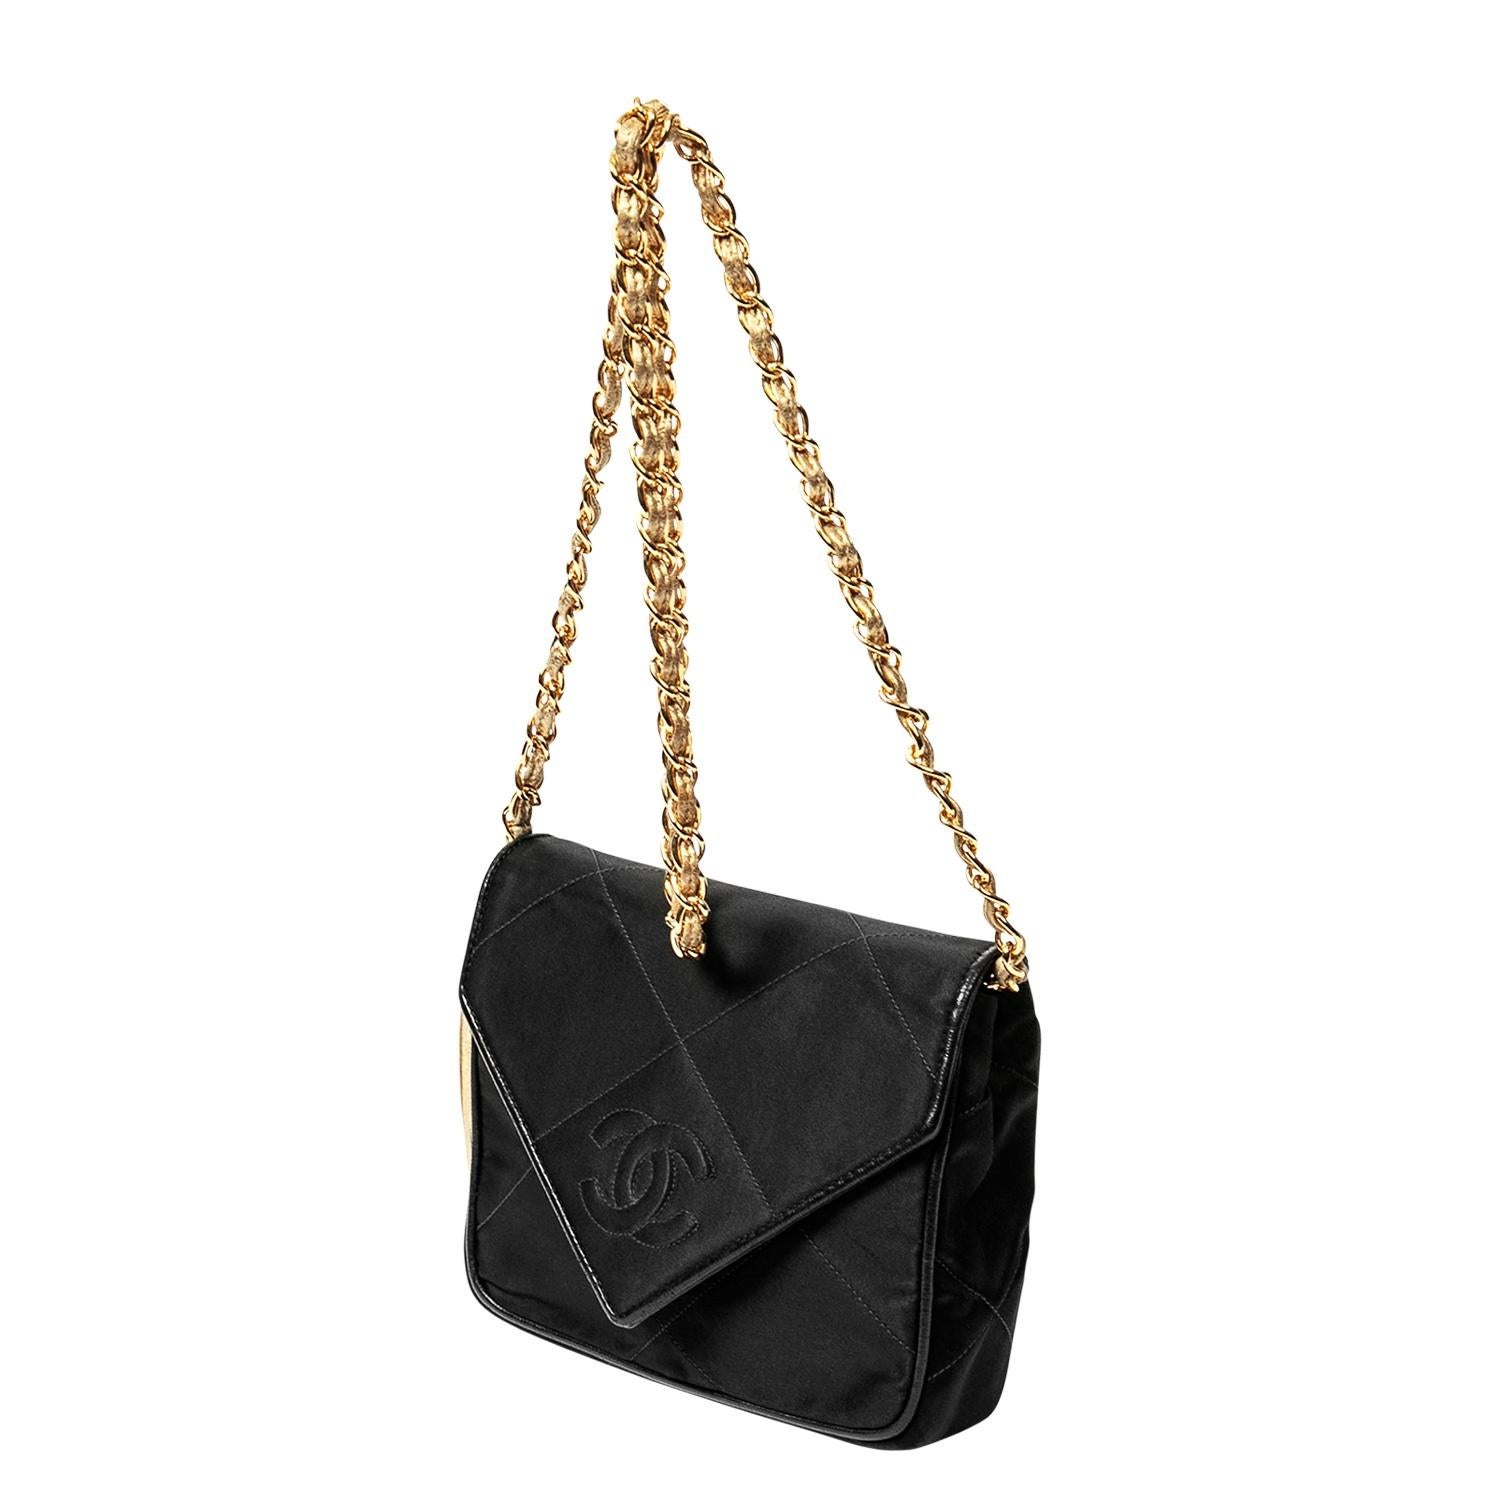 Wedding season is upon us!! This is the perfect elegant vintage Chanel envelope CC Flap Bag. The black/gold combo is spirited and sharp and can definitely be dressed down too, paired with denim and a slingback heel. Crafted in black satin, a subtle